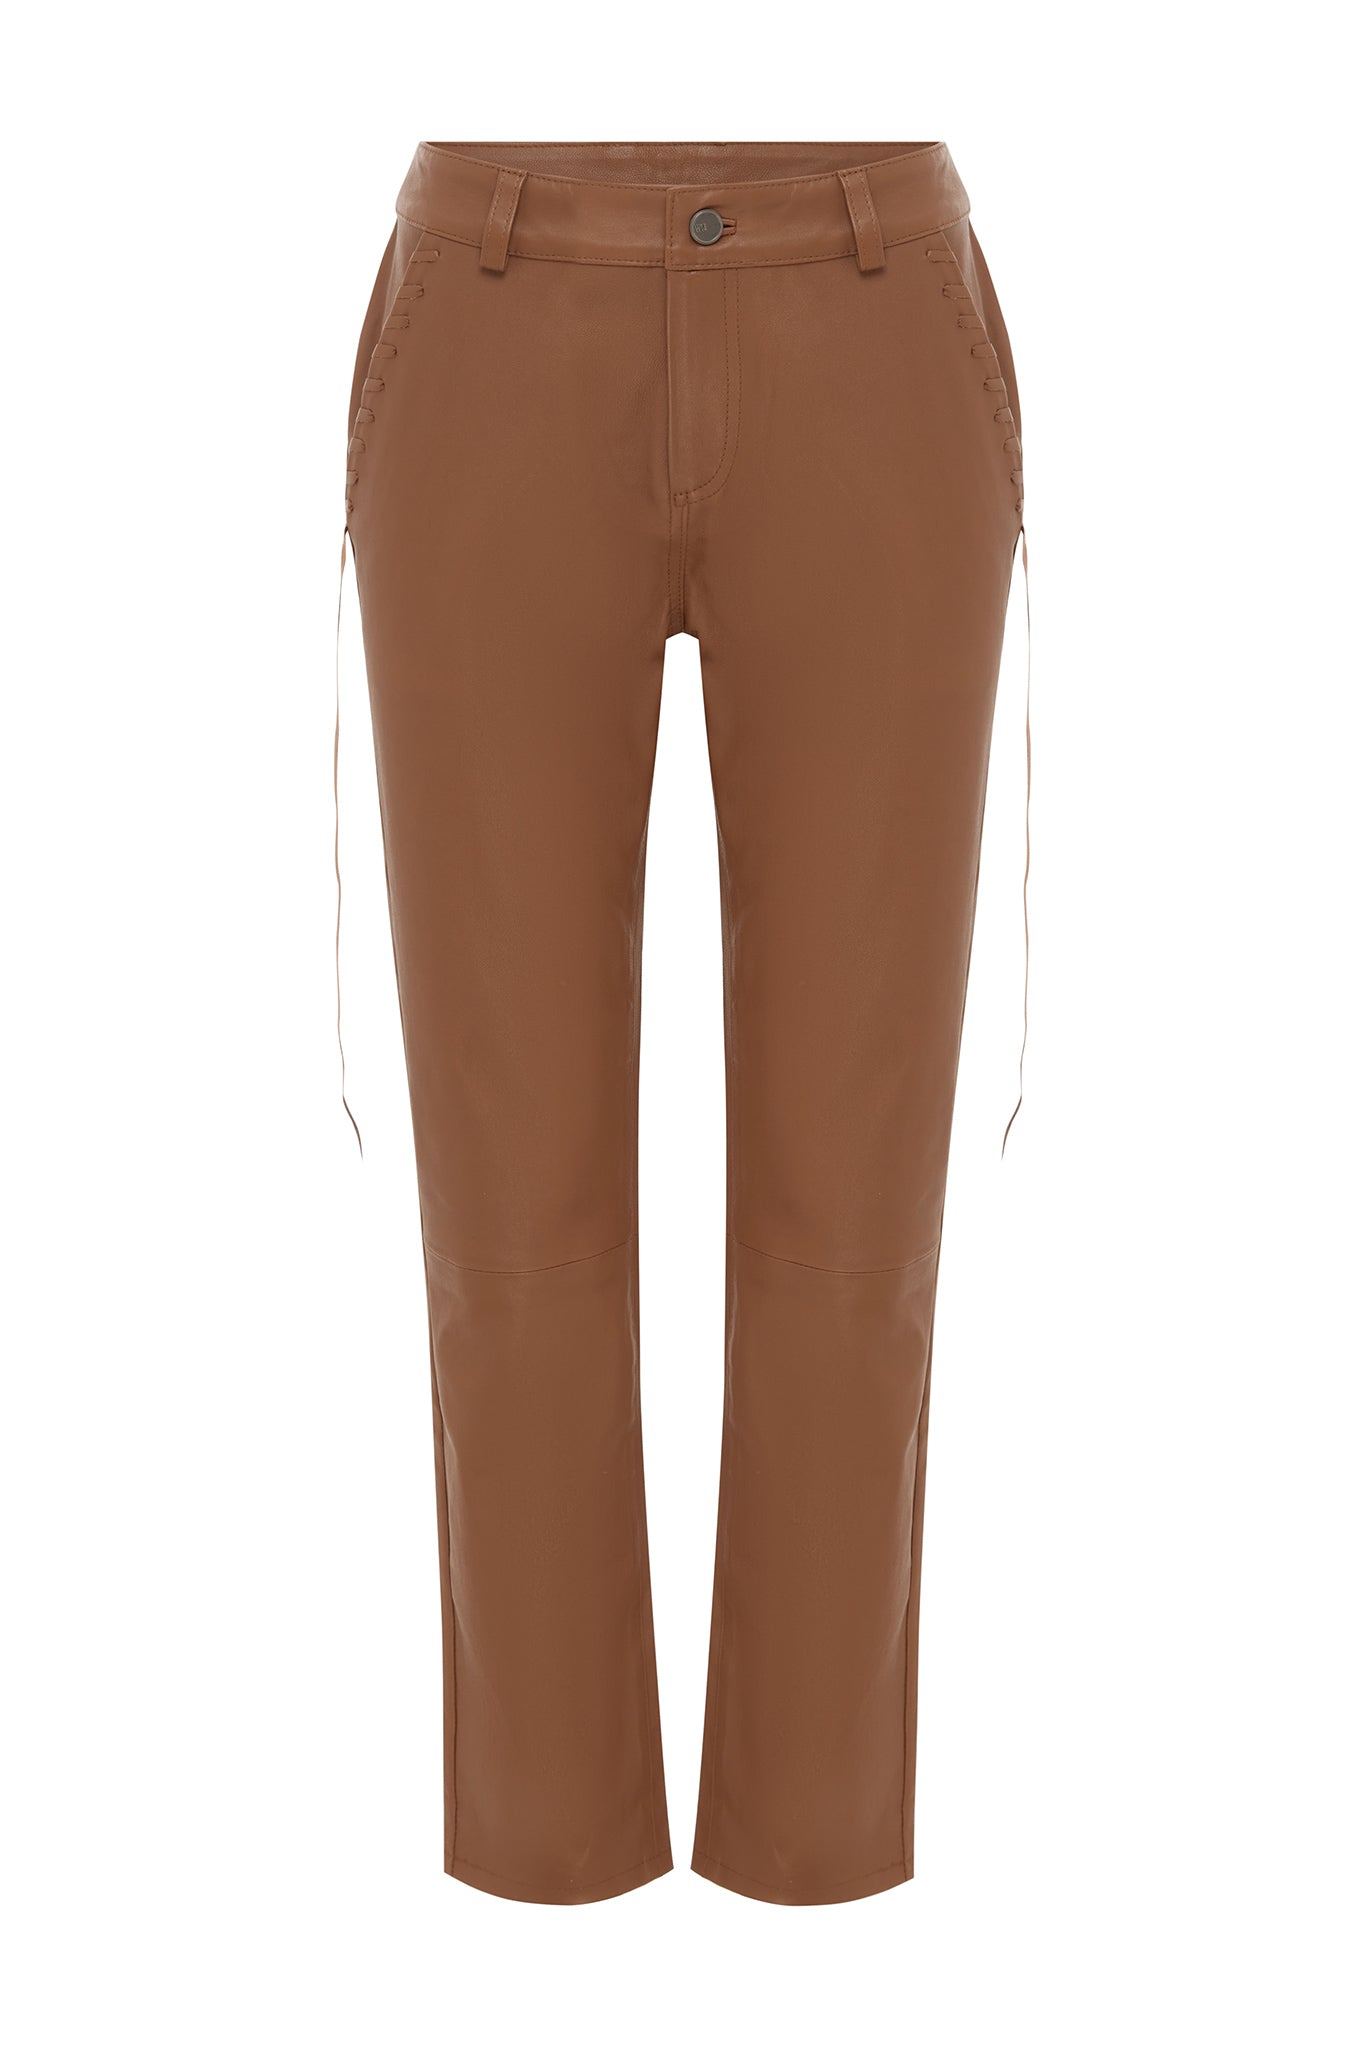 NEWPORT - NP25031 Wanderer Stretch Pant - Twilight - Frontline Designer  Clothes and Accessories